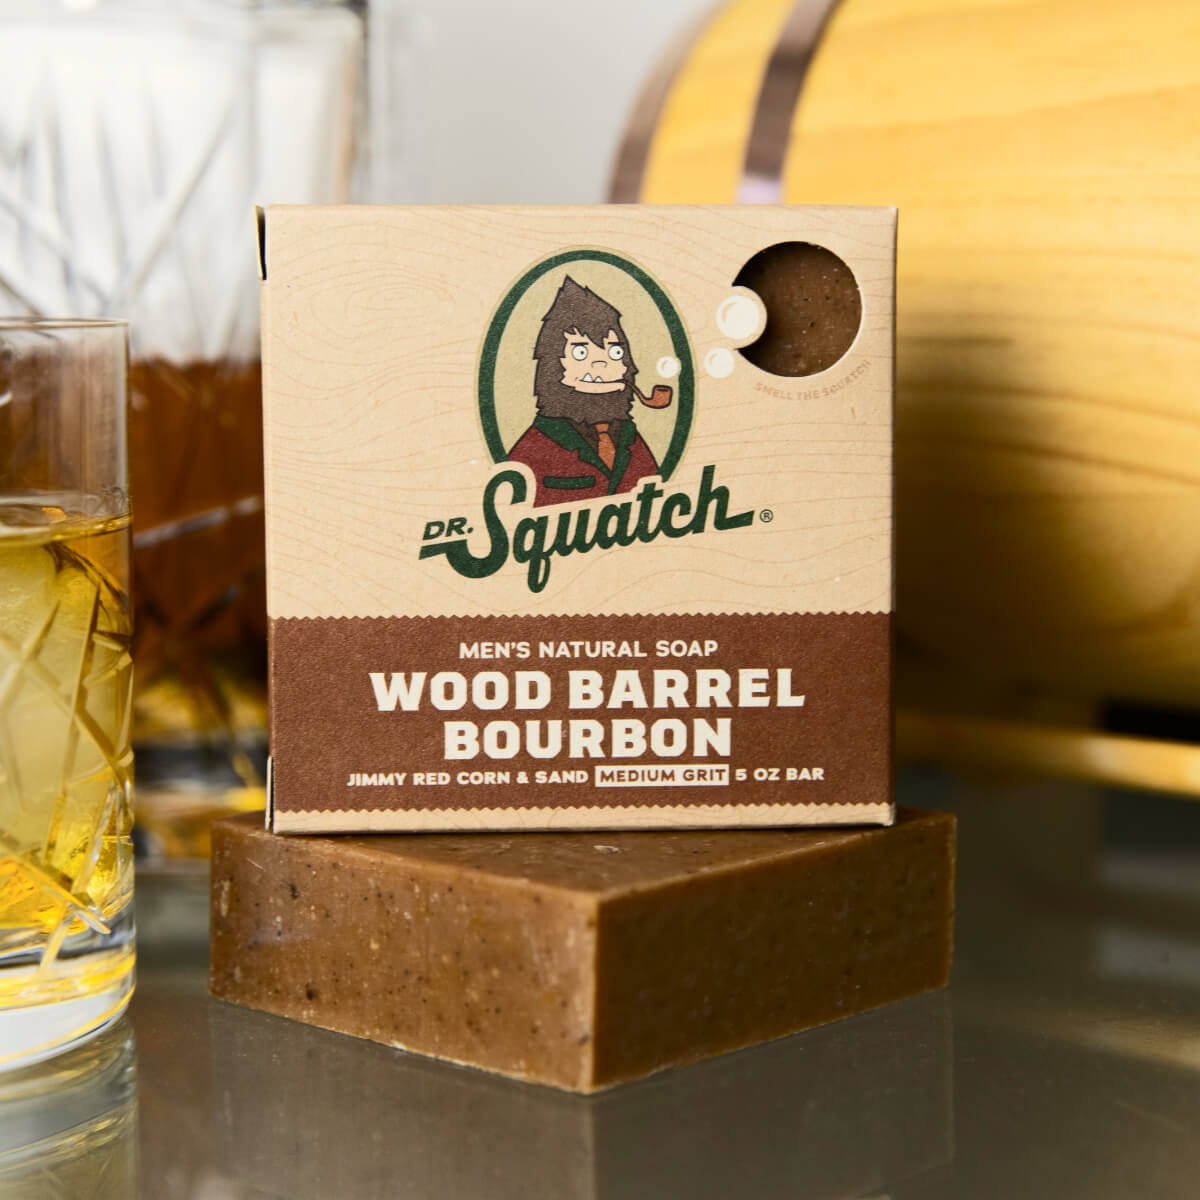 Dr. Squatch Men's Natural Bar Soap from Moisturizing Soap Made from Natural  Oils - Cold Process Soap with No Harsh Chemicals - Wood Barrel Bourbon